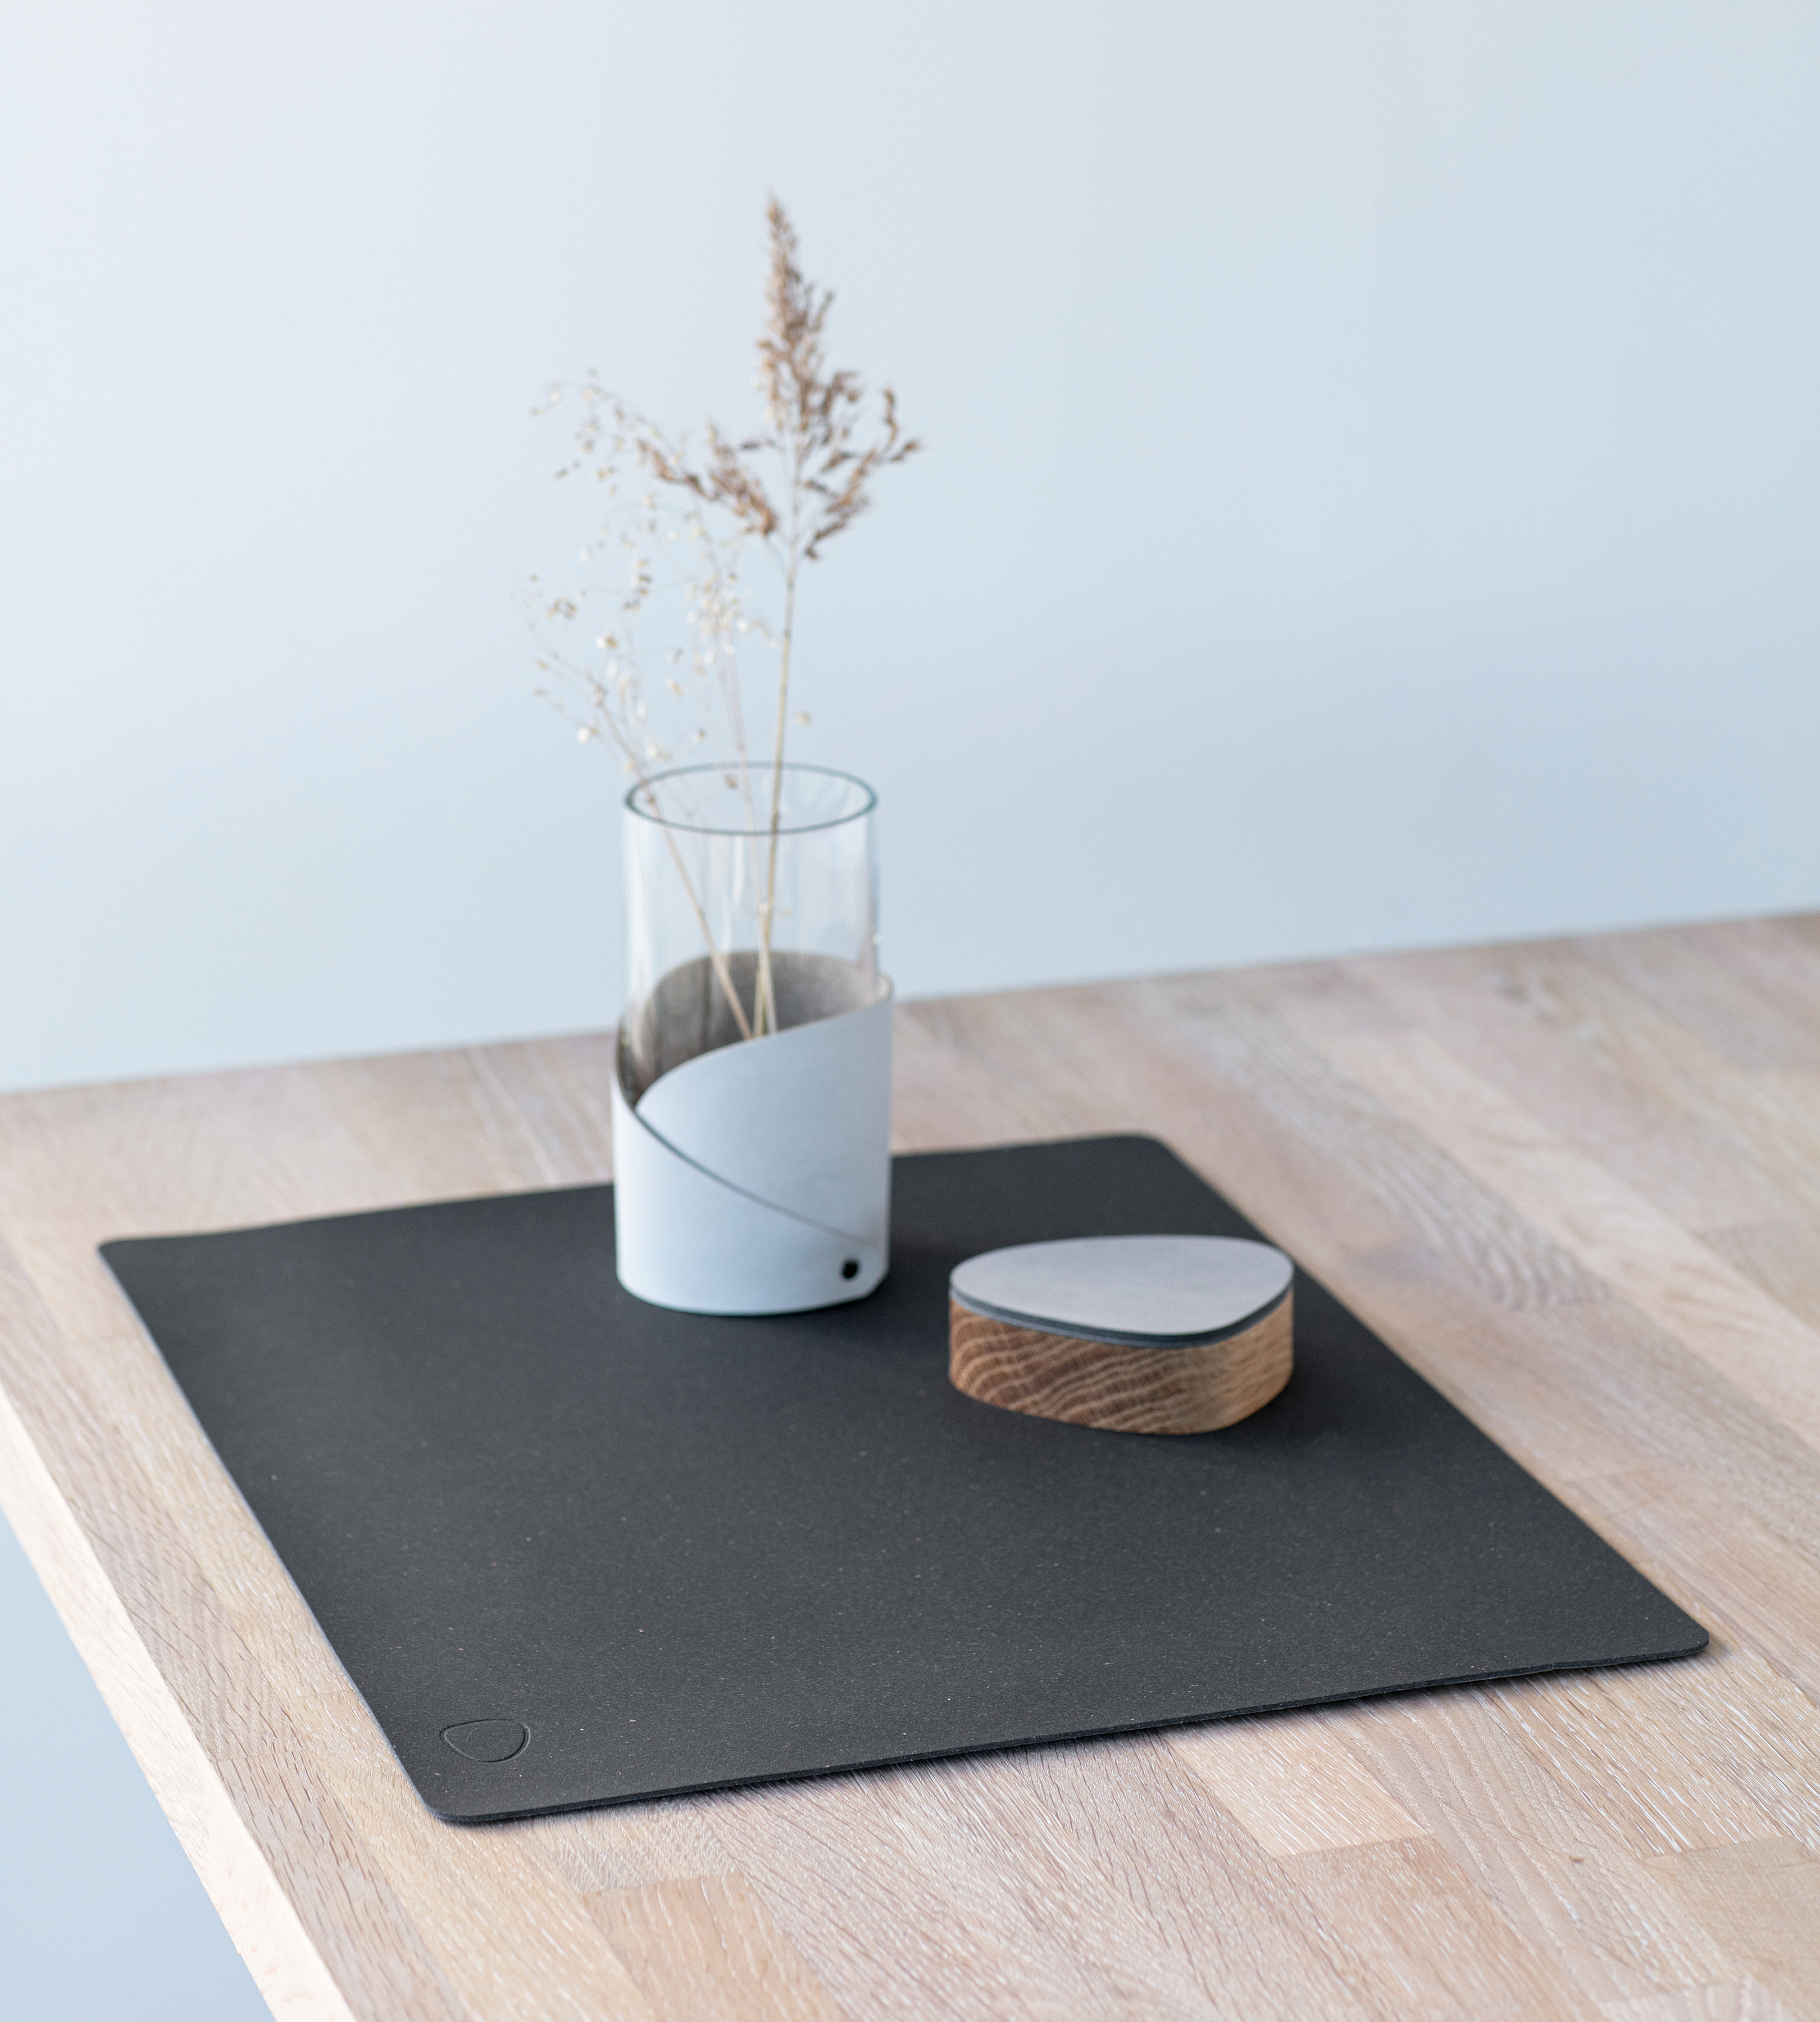 Lind DNA Square Core Table Mat, Flecked Anthracite, Large